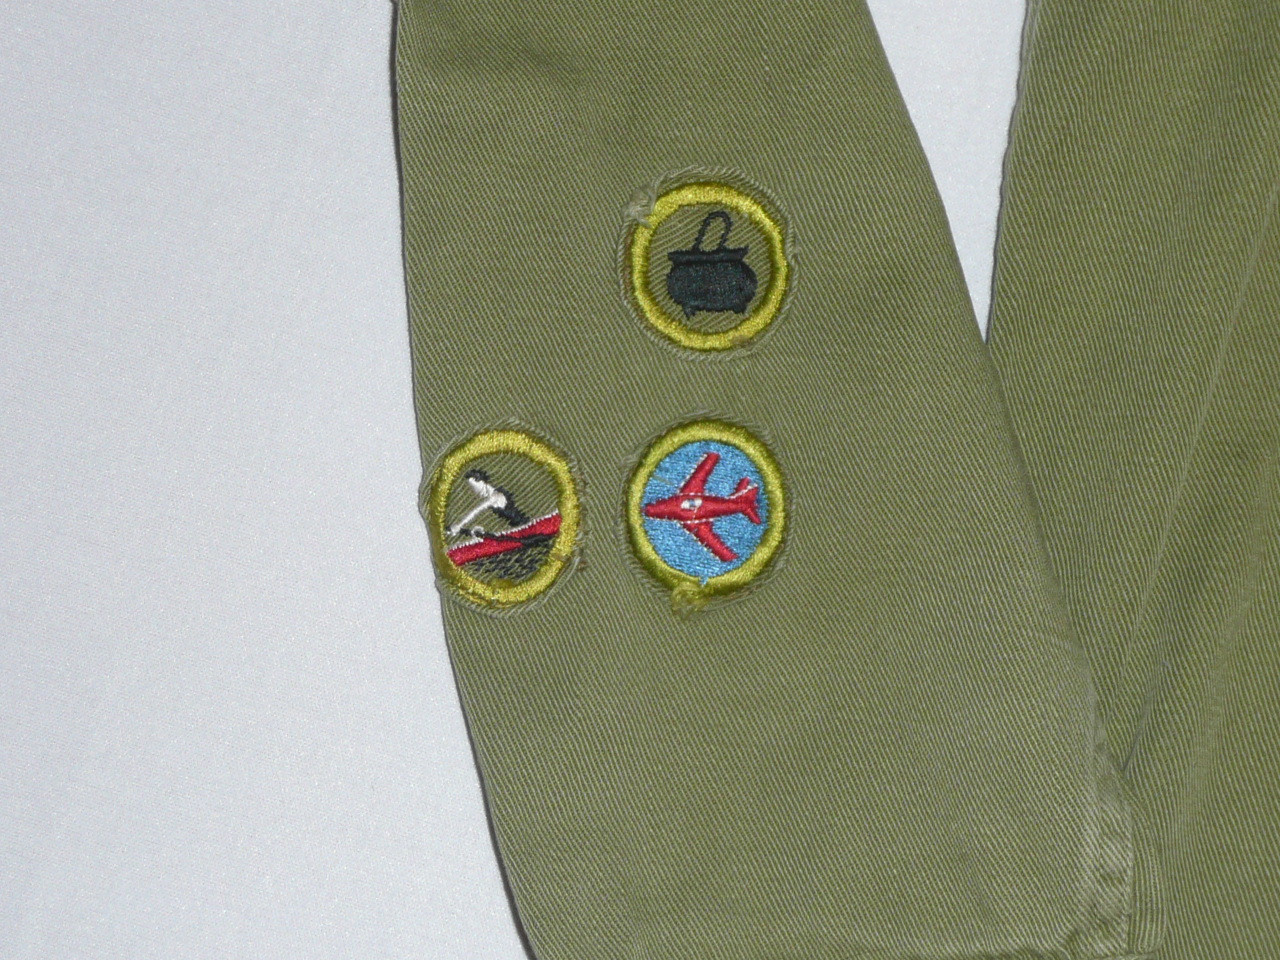 1960's Boy Scout Uniform Shirt with patches and "VISALIA" RWS, 18" Chest and 28" Length, #FB109